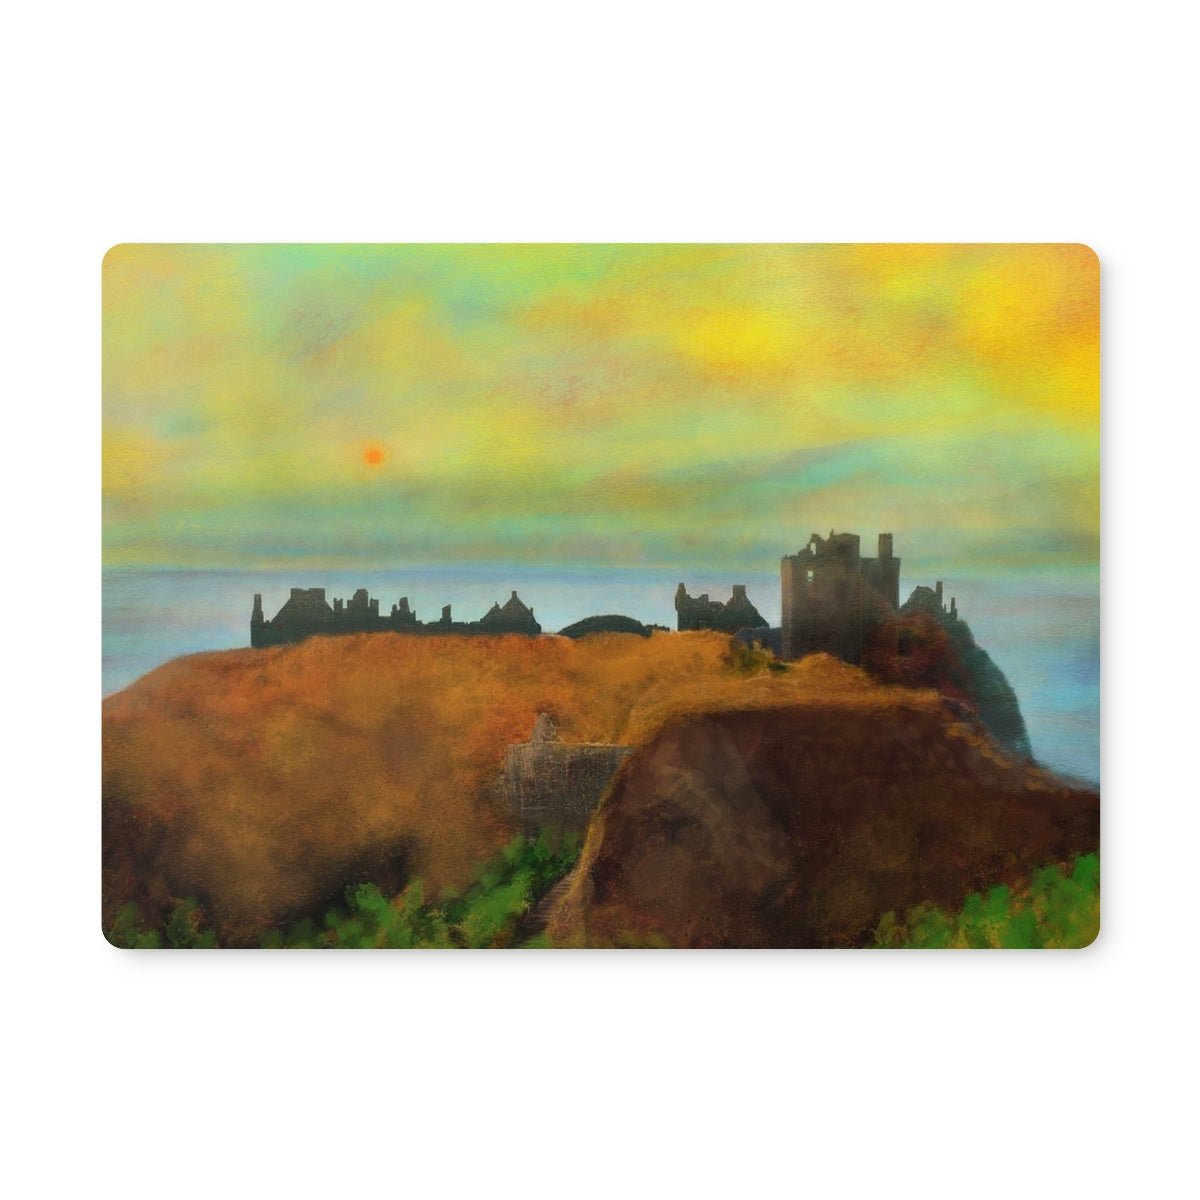 Dunnottar Castle Art Gifts Placemat-Placemats-Scottish Castles Art Gallery-6 Placemats-Paintings, Prints, Homeware, Art Gifts From Scotland By Scottish Artist Kevin Hunter